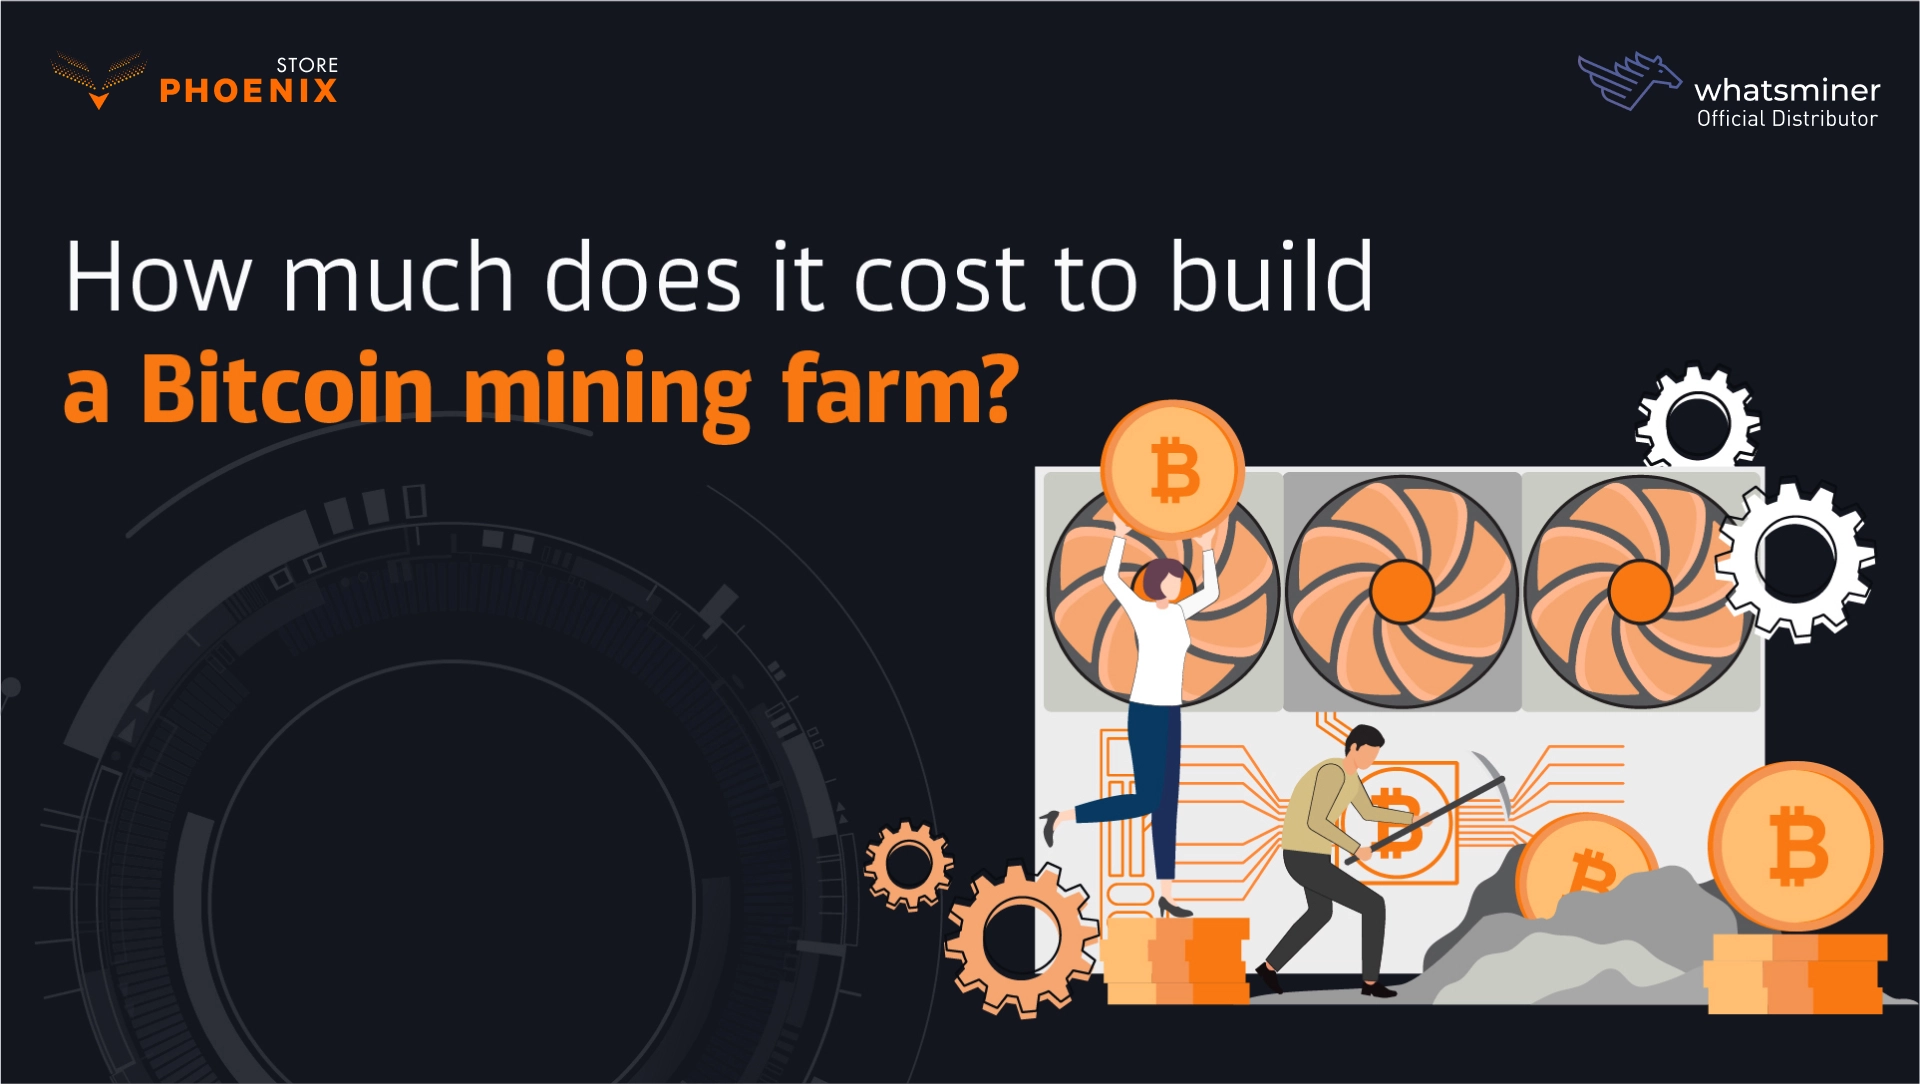 How Much Does It Cost to Build a Bitcoin Mining Farm?